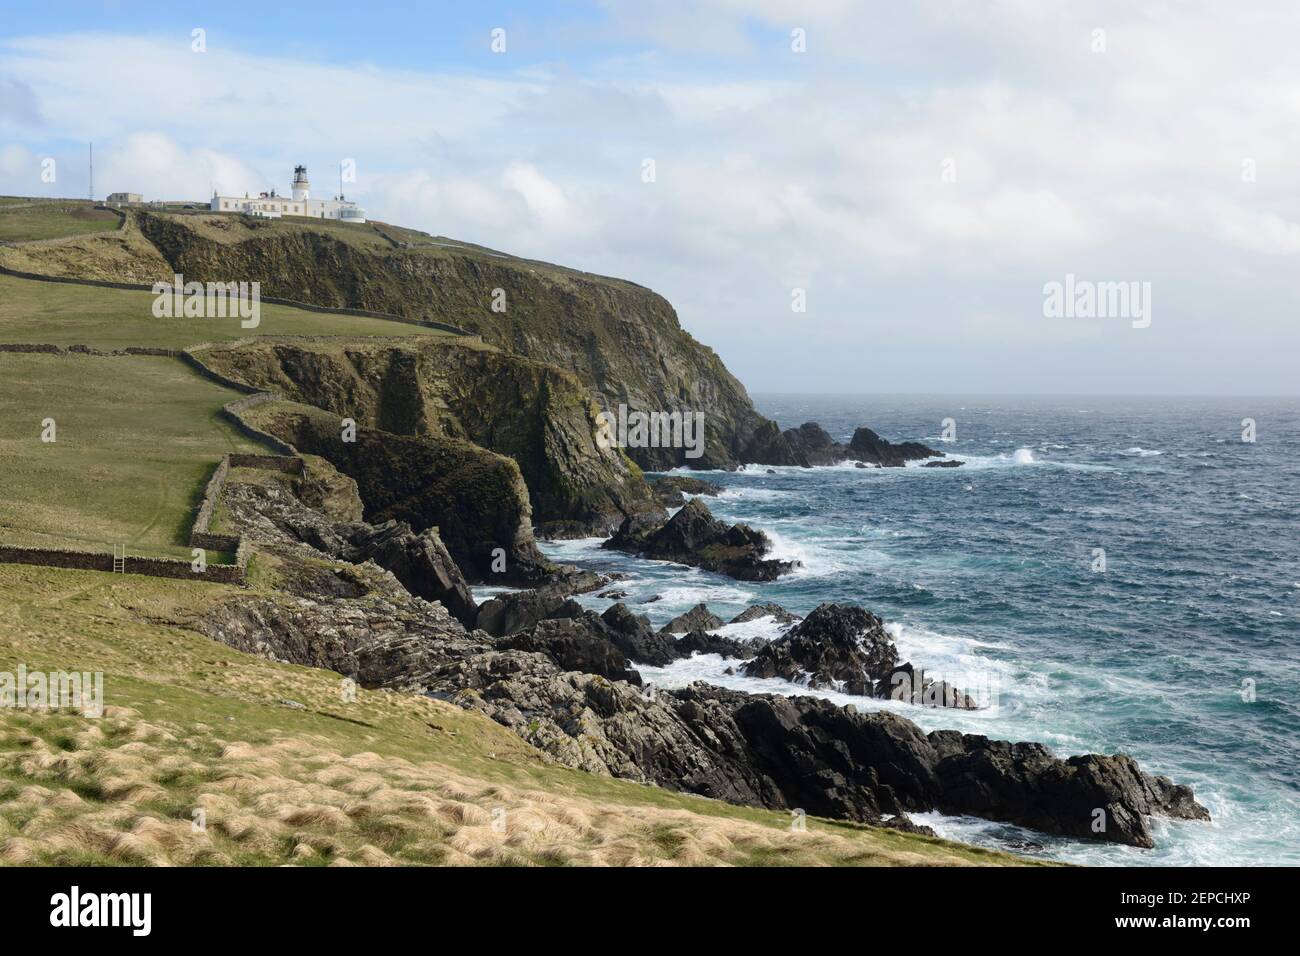 Sumburgh Head lighthouse, built by Robert Stevenson, at the southernmost tip of Shetland. Stock Photo